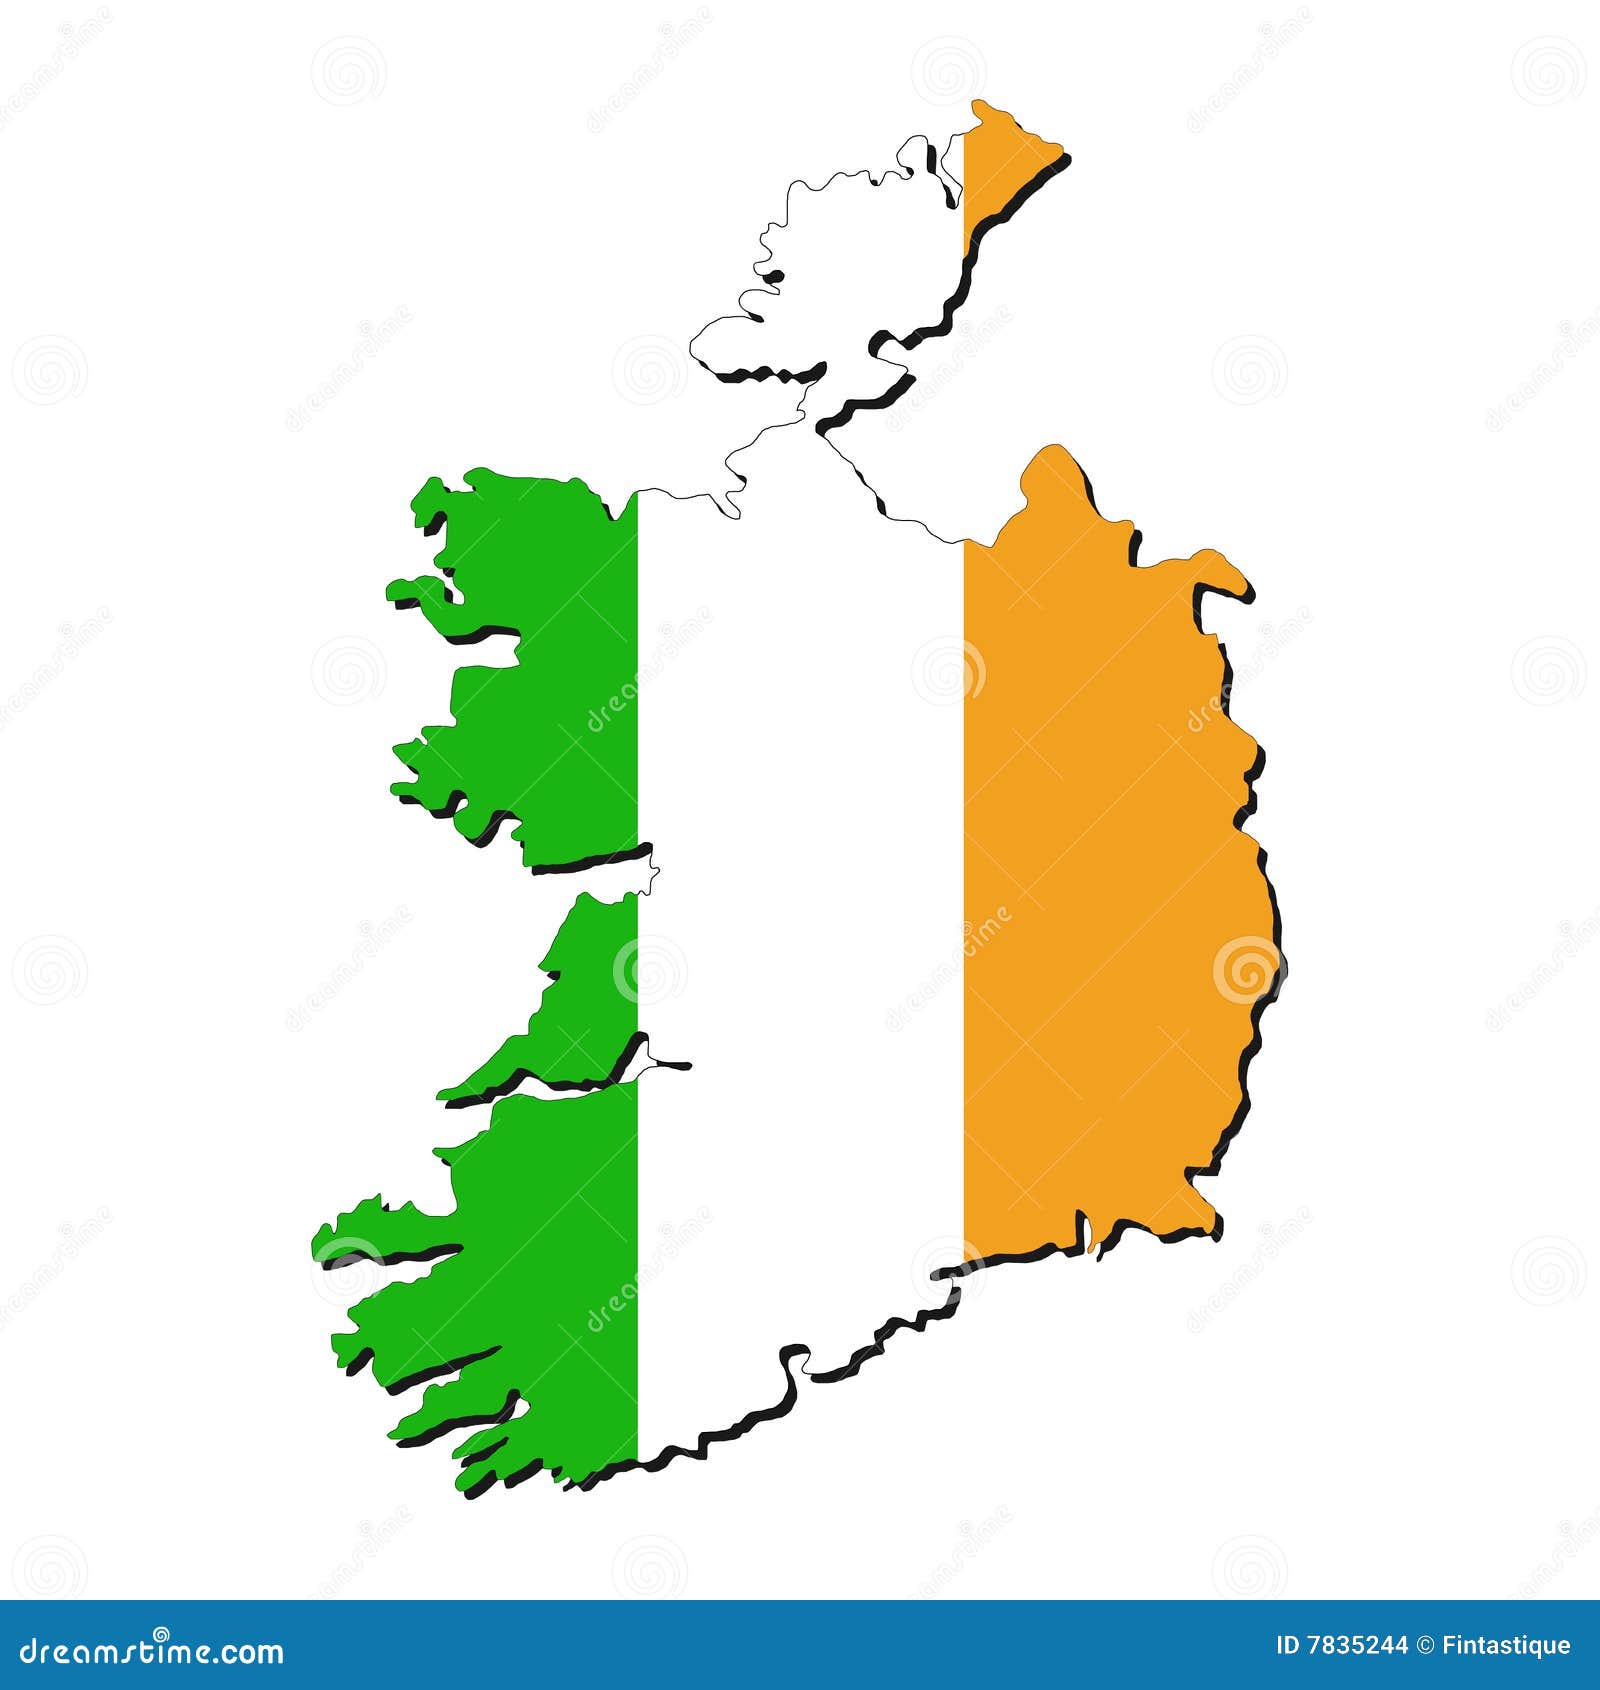 clipart map of uk and ireland - photo #16